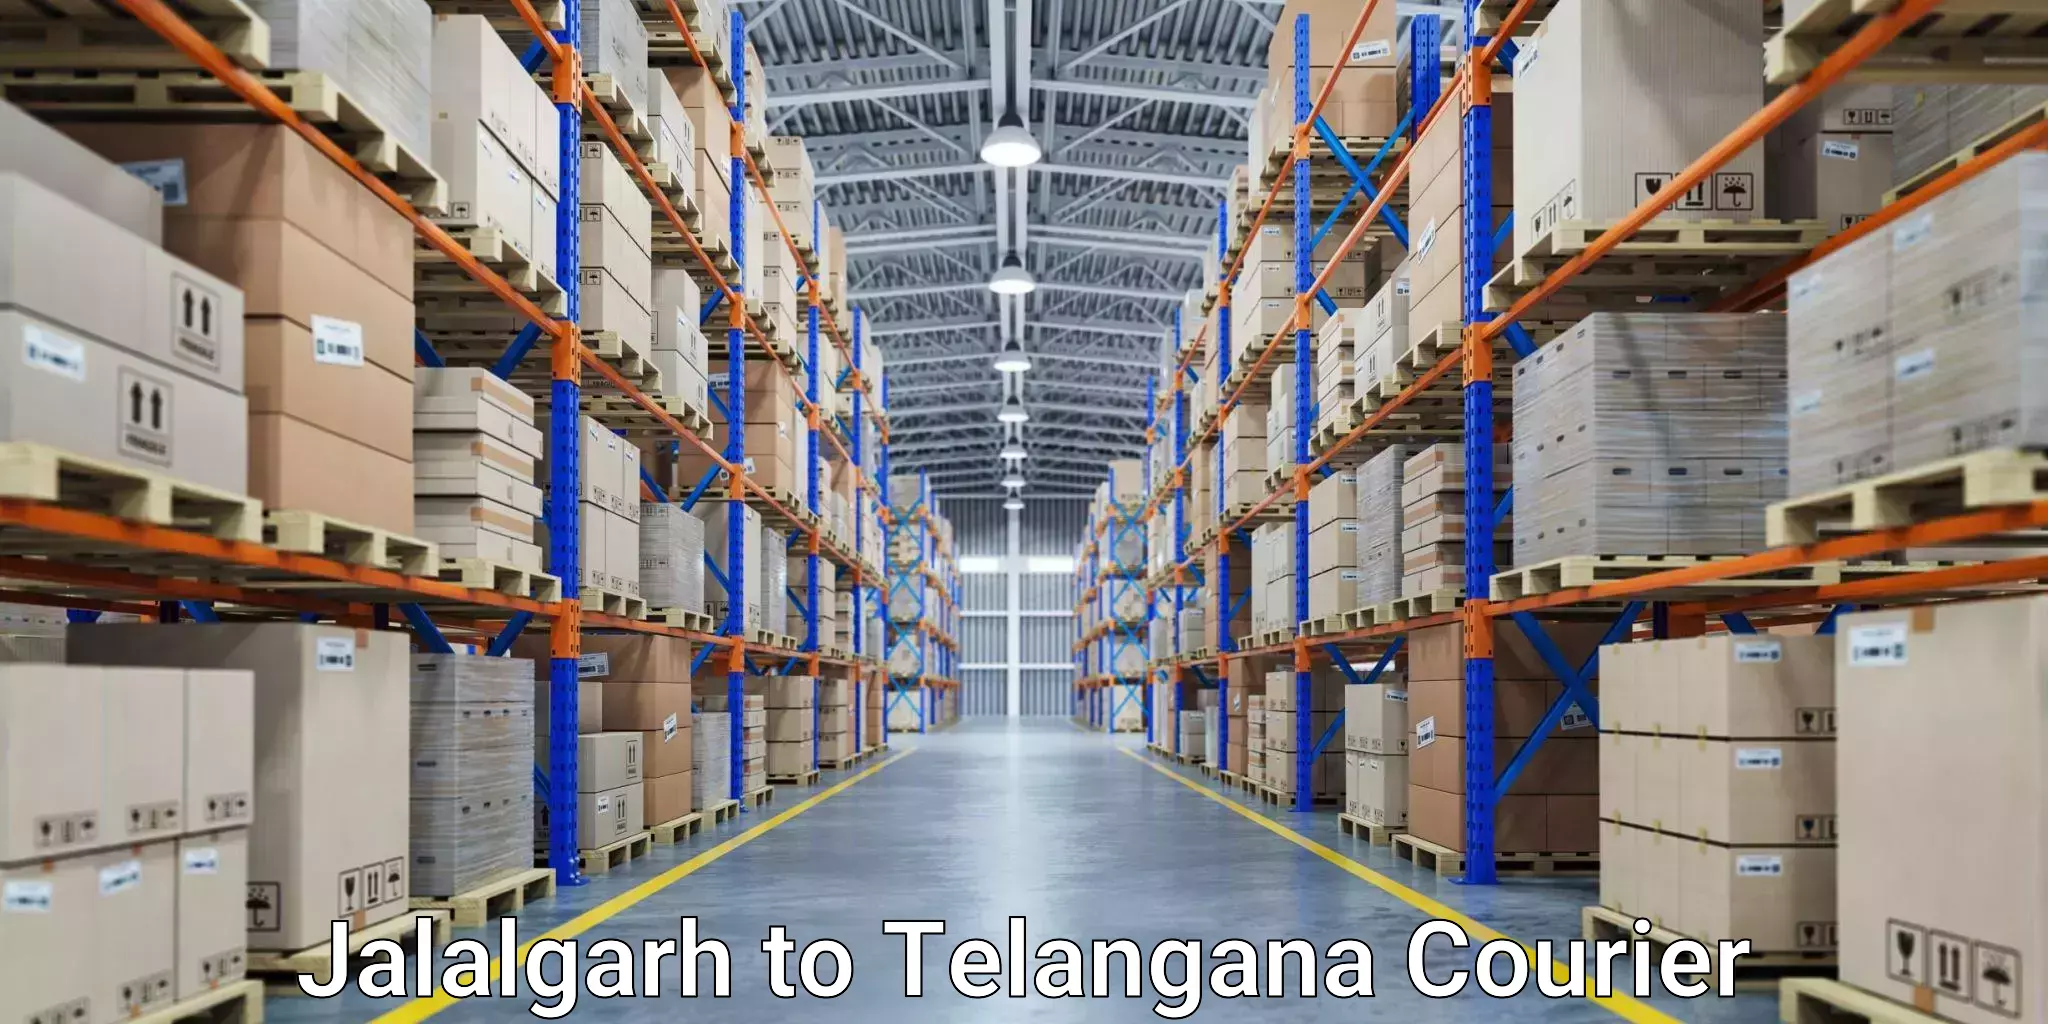 Postal and courier services in Jalalgarh to Khammam